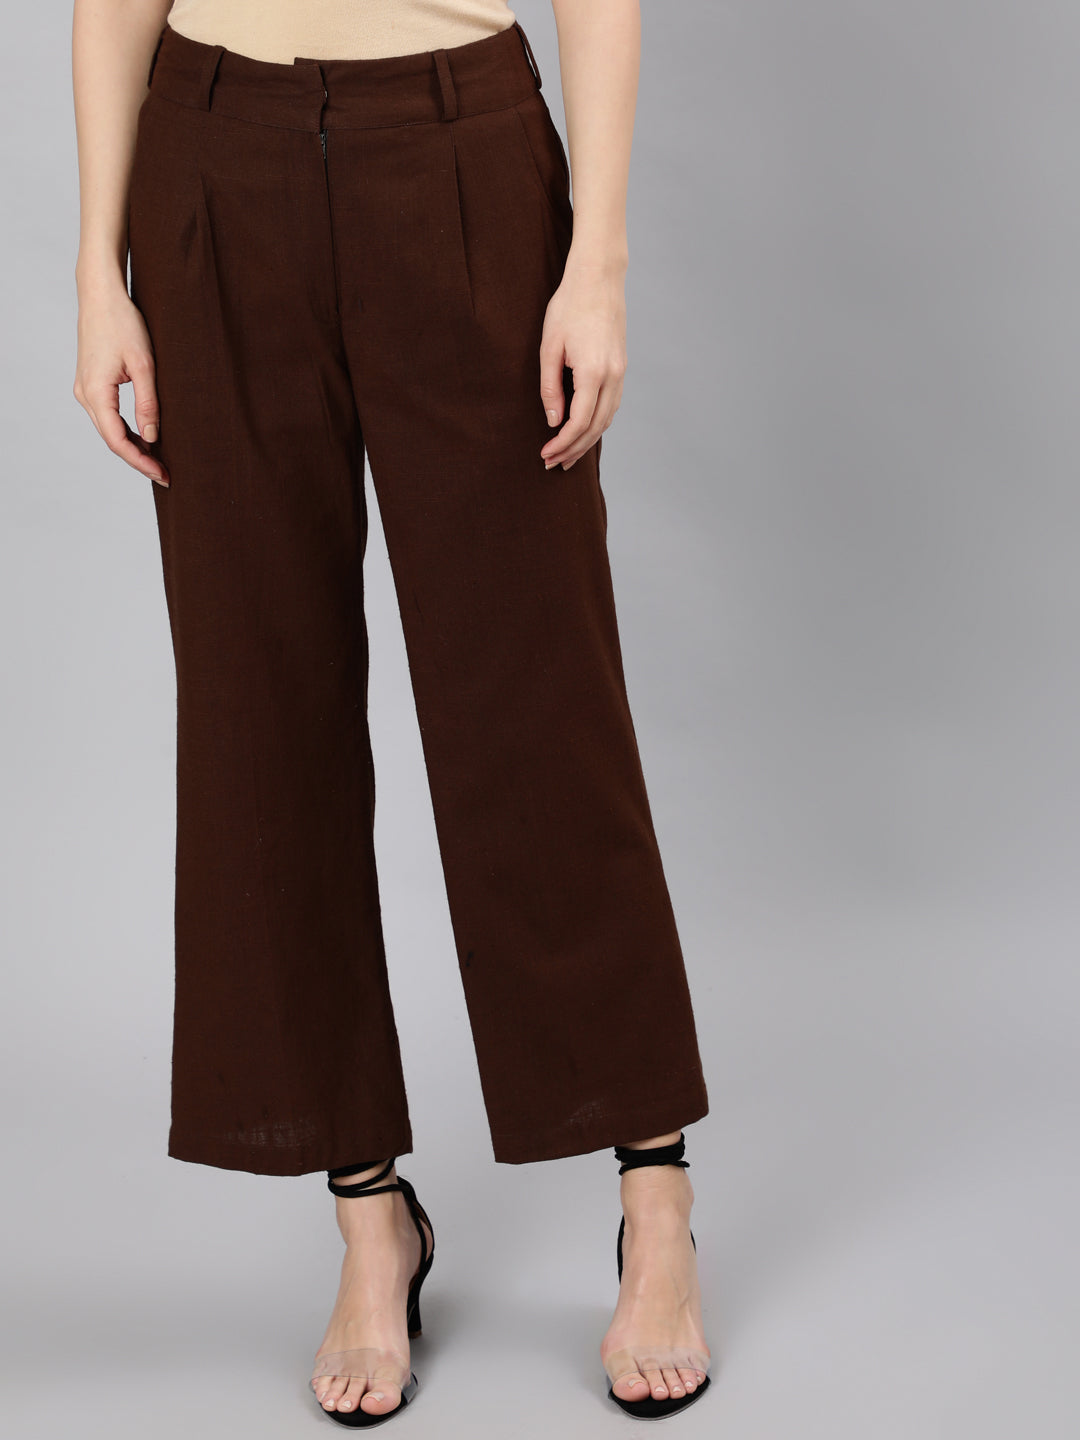 Buy parallel pants with top